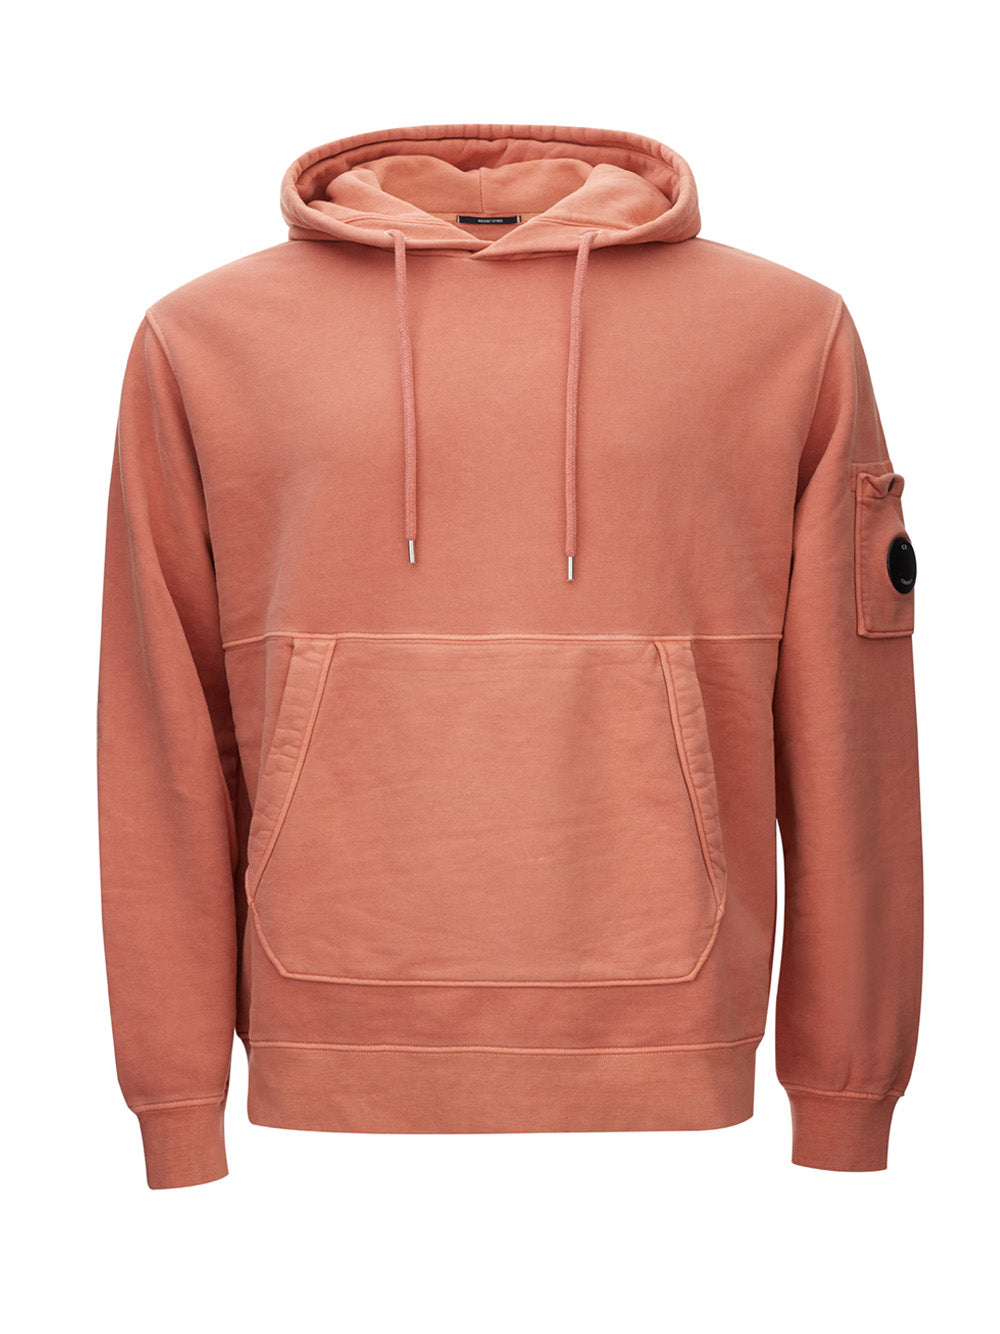 CP Company Hoodie and Pocket